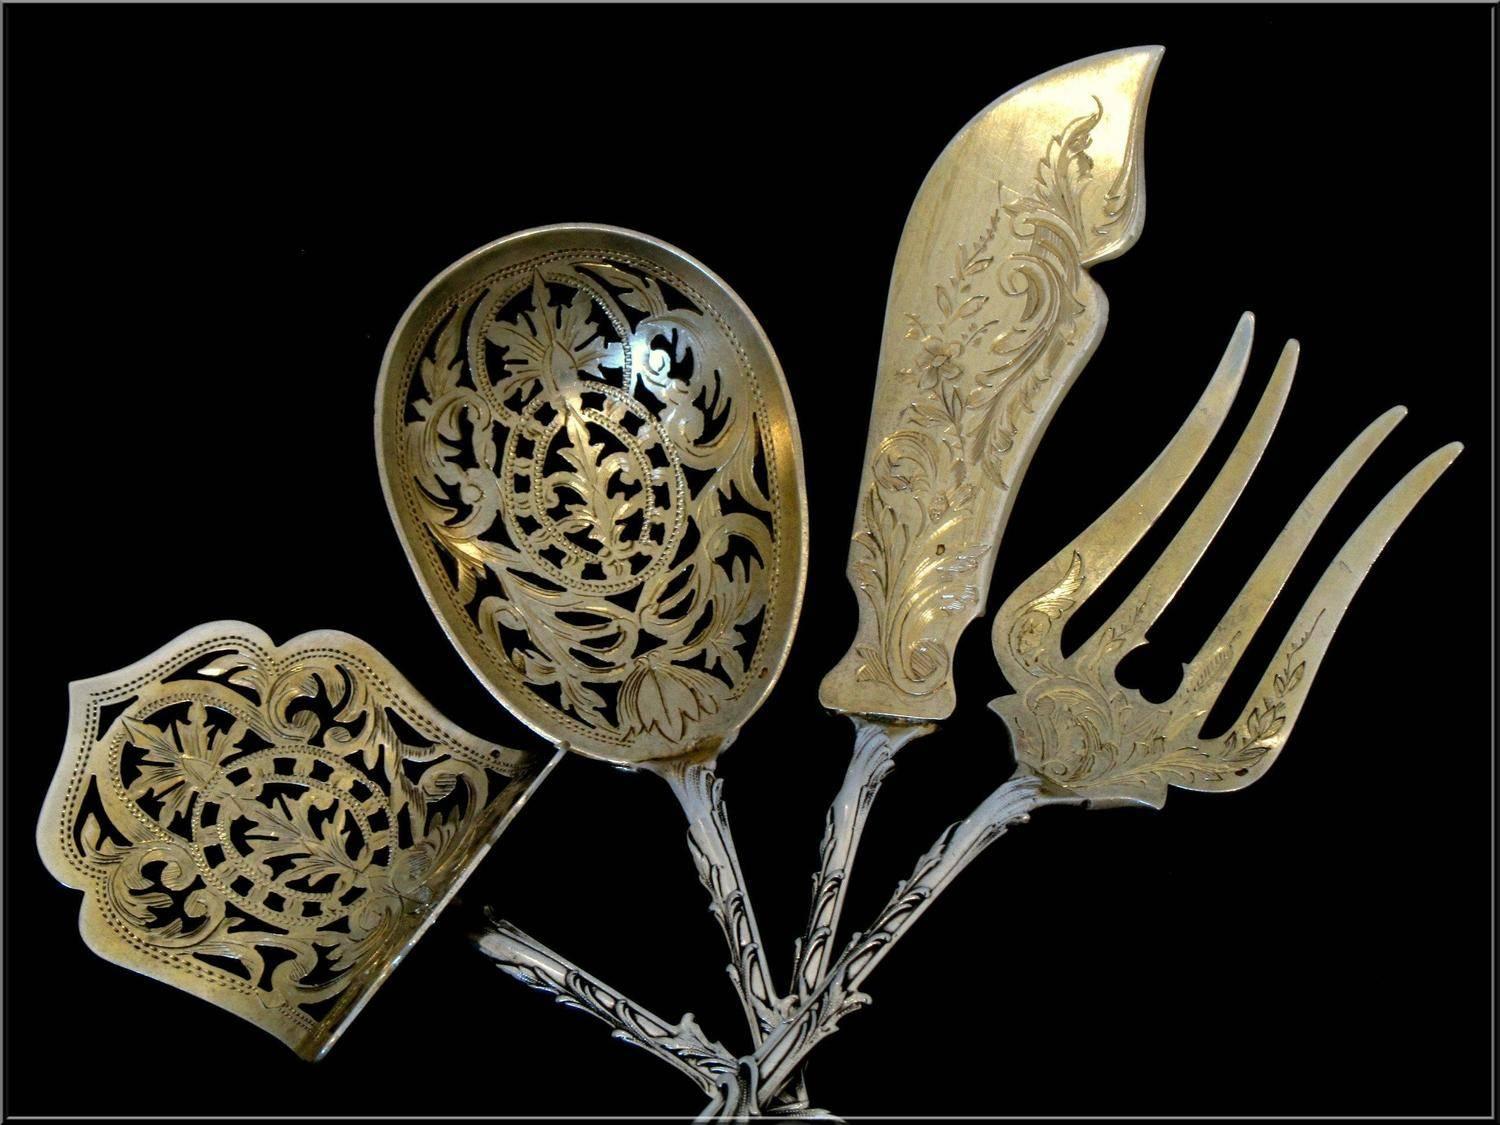  Ernie French All Sterling Silver 18K Gold Dessert Hors D'oeuvre Set with Box For Sale 4